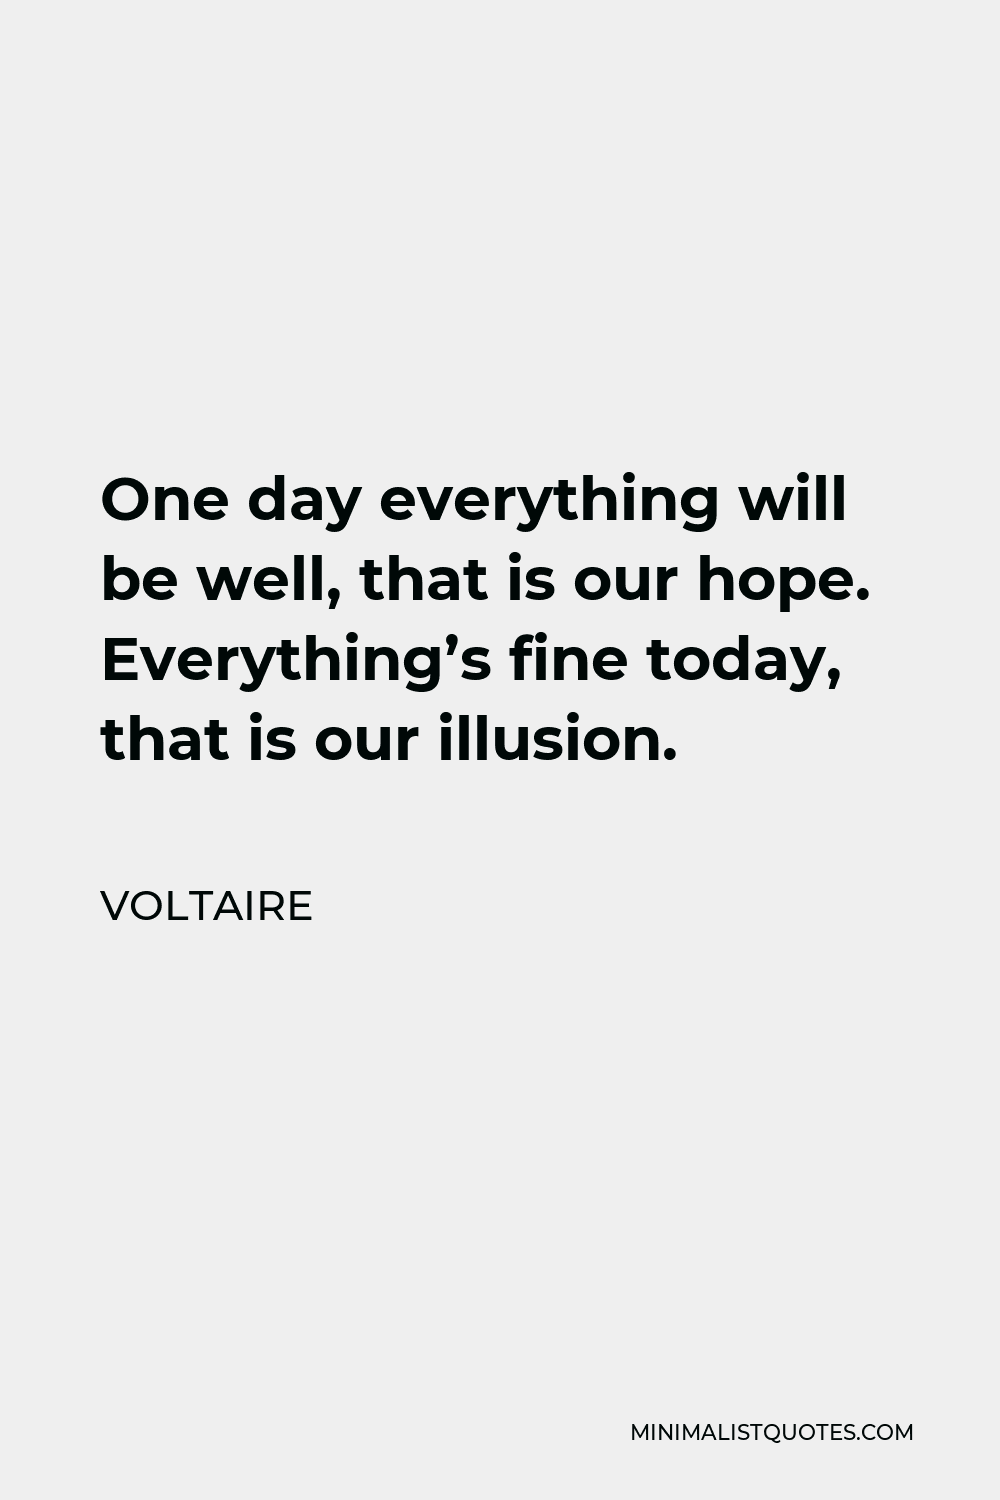 Voltaire Quote - One day everything will be well, that is our hope. Everything’s fine today, that is our illusion.